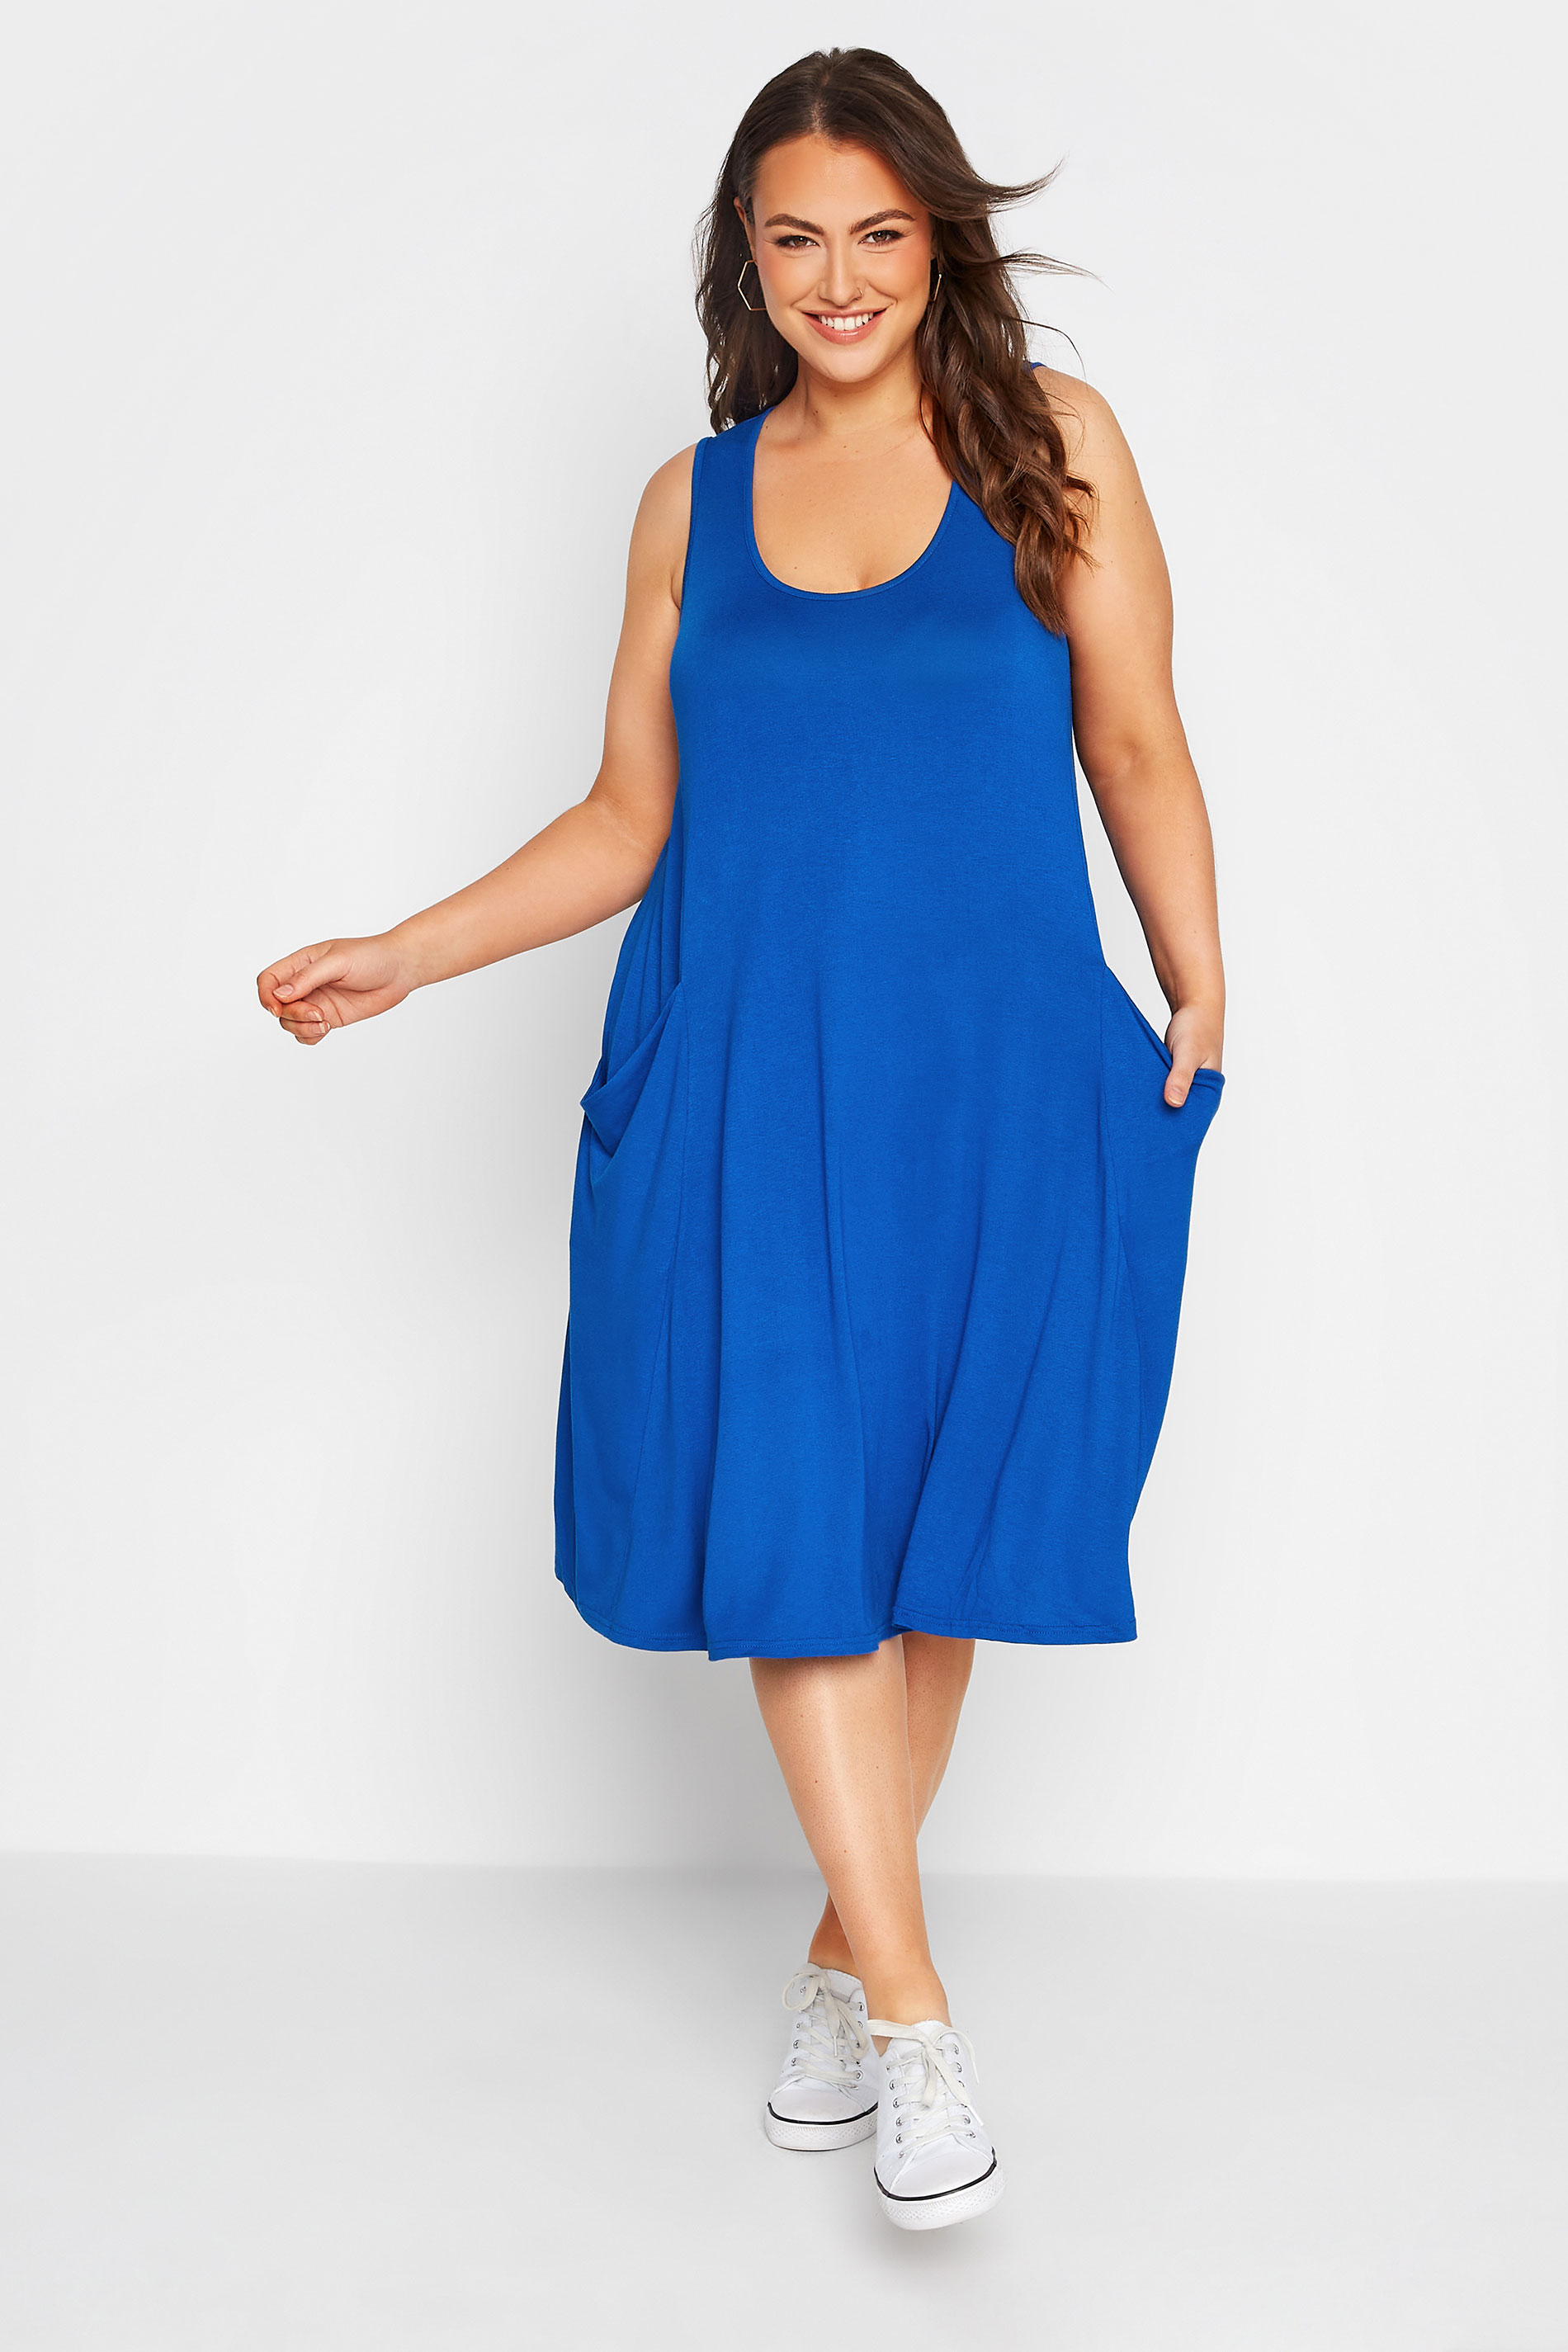 Robes Grande Taille Grande taille  Robes Casual | Robe Bleue Roi sans Manches Midi en Jersey à Poches - JR85688